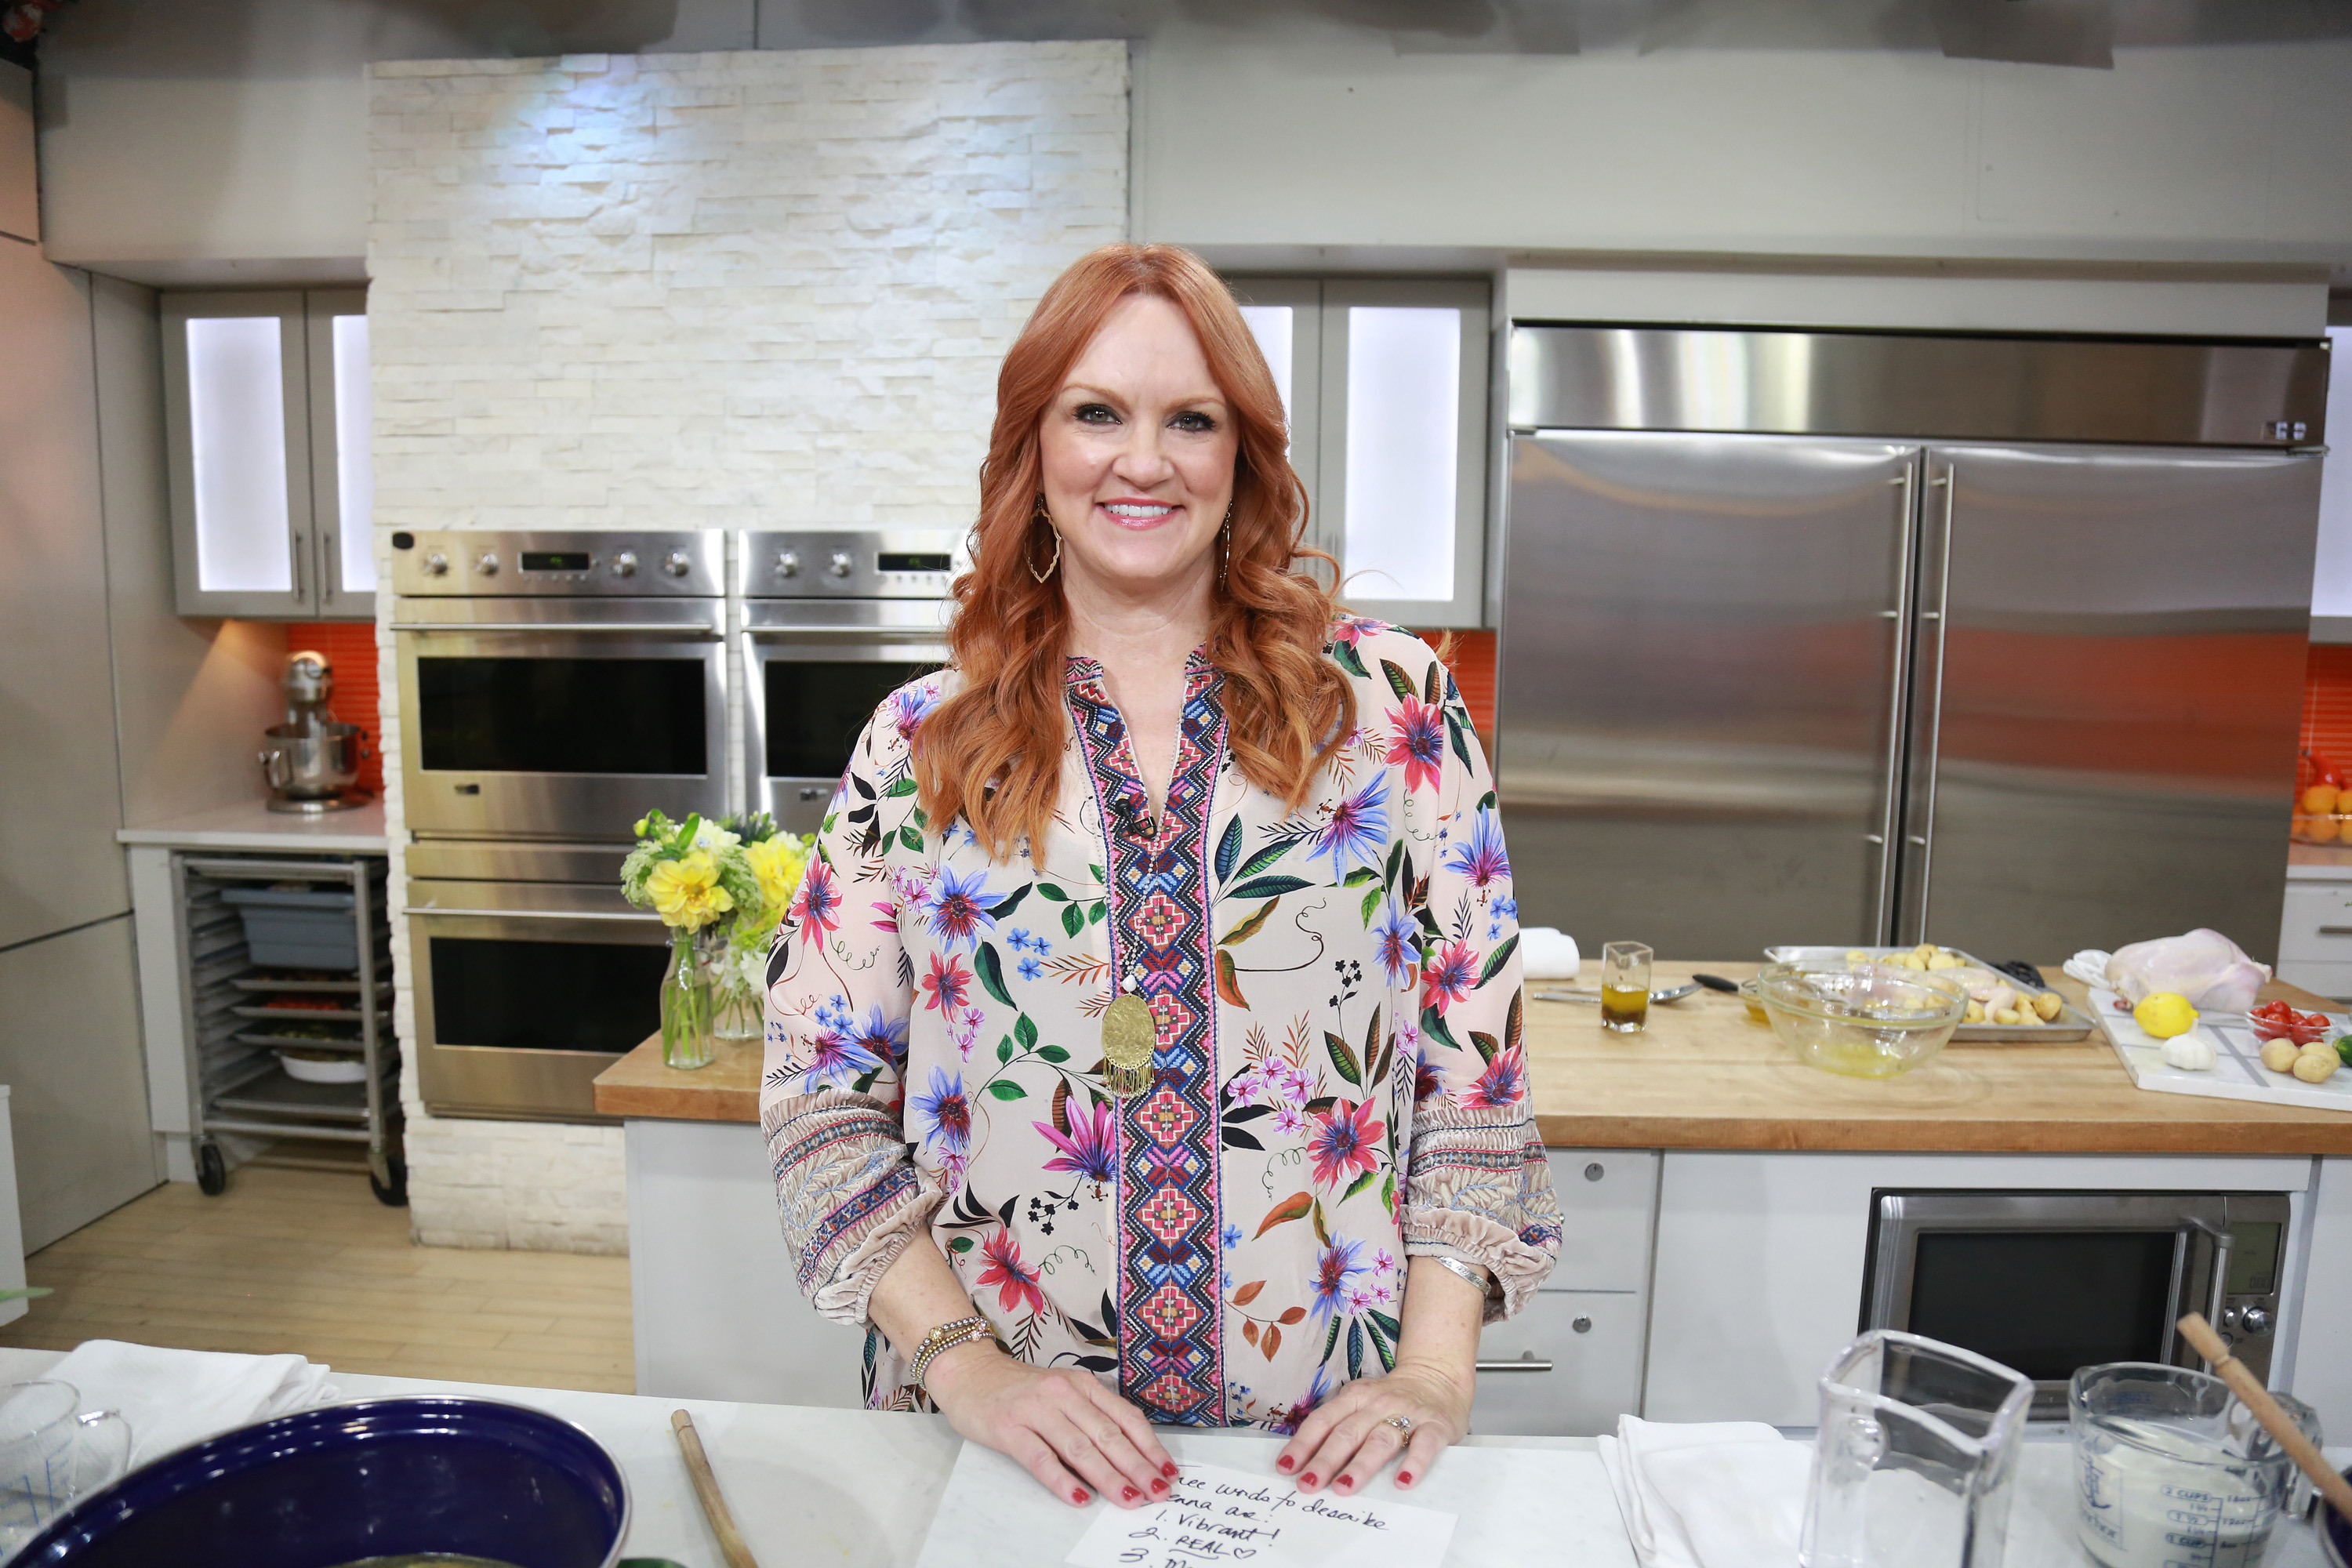 Ree Drummond smiles as she stands at a counter